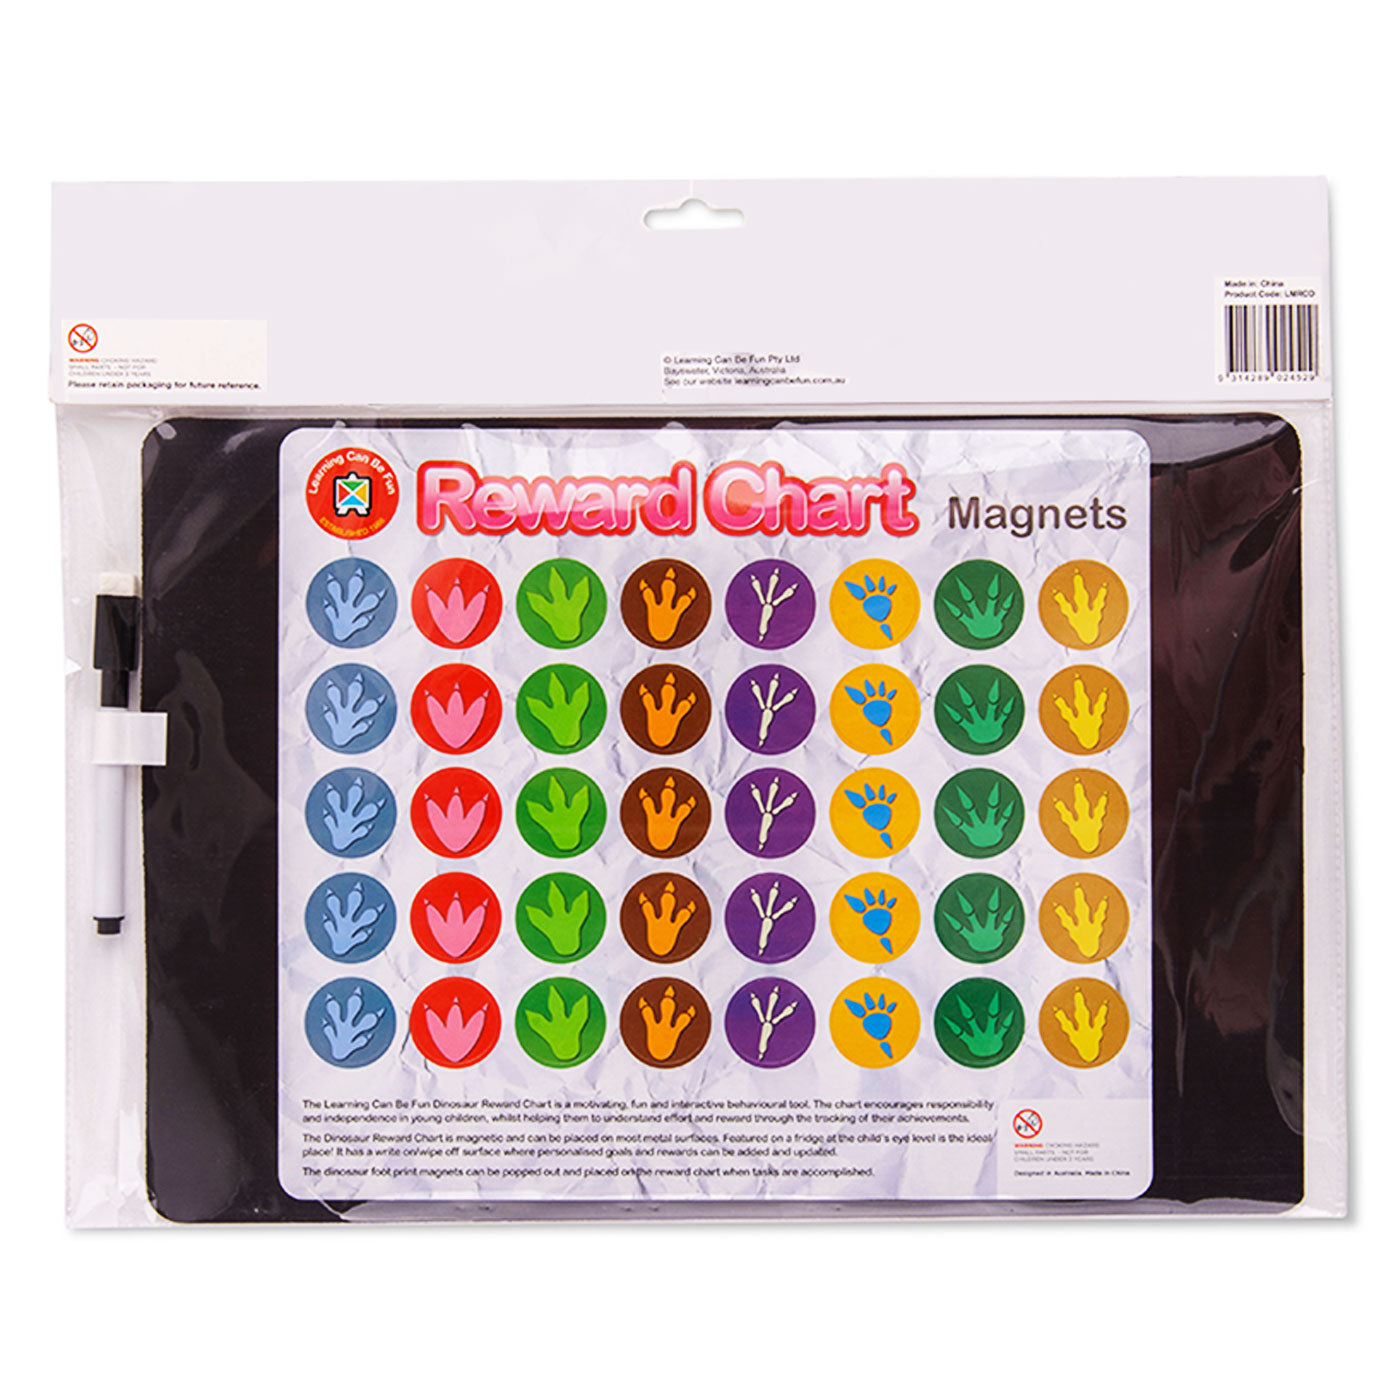 LCBF Magnetic Reward Chart Reusable with 40 Reward Magnets Dinosaurs